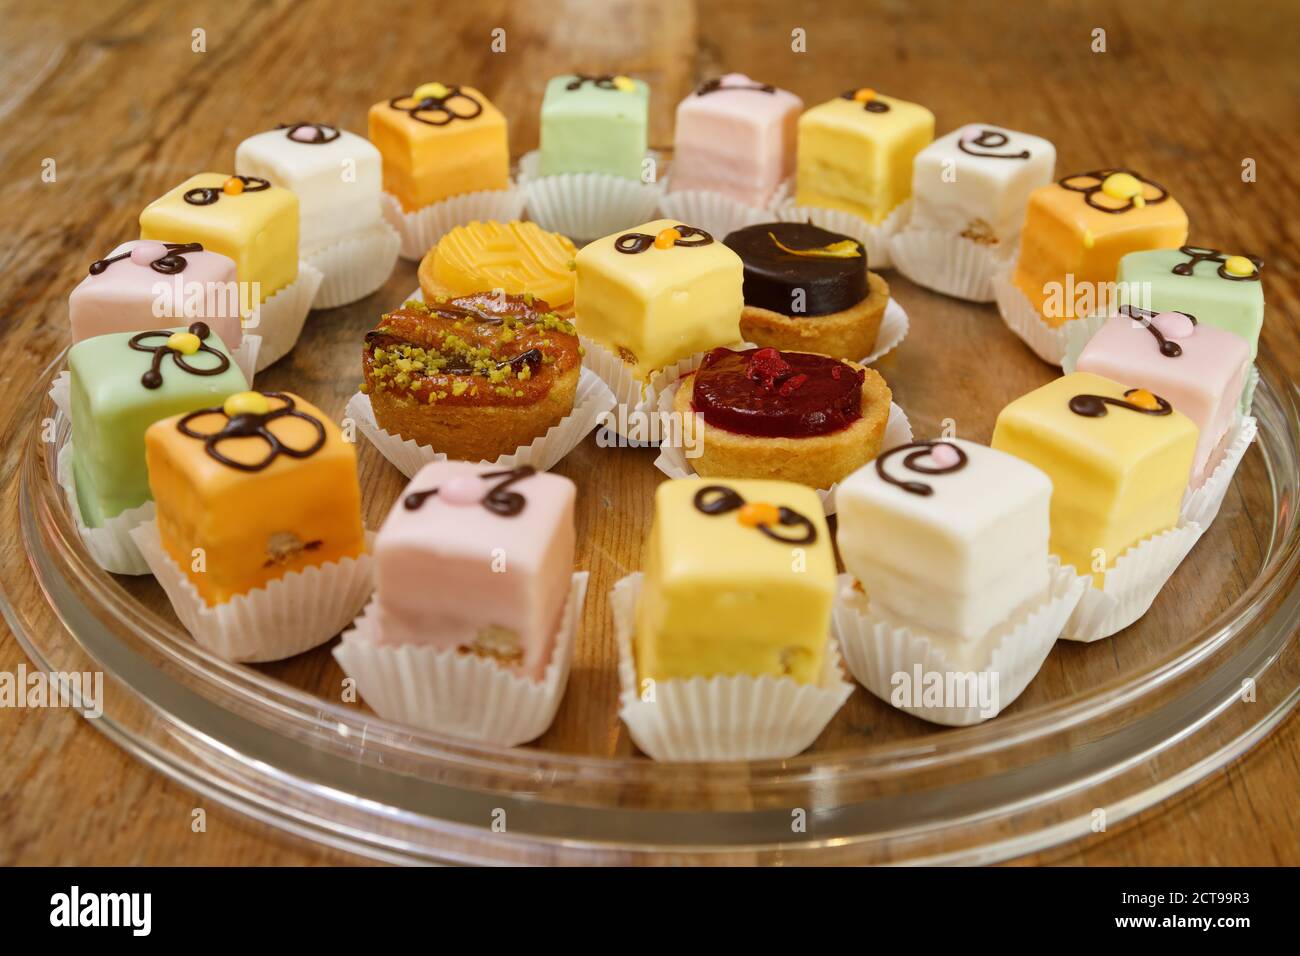 Iced mini cakes named Petit four glace. Delicious for a high tea or as dessert. Stock Photo